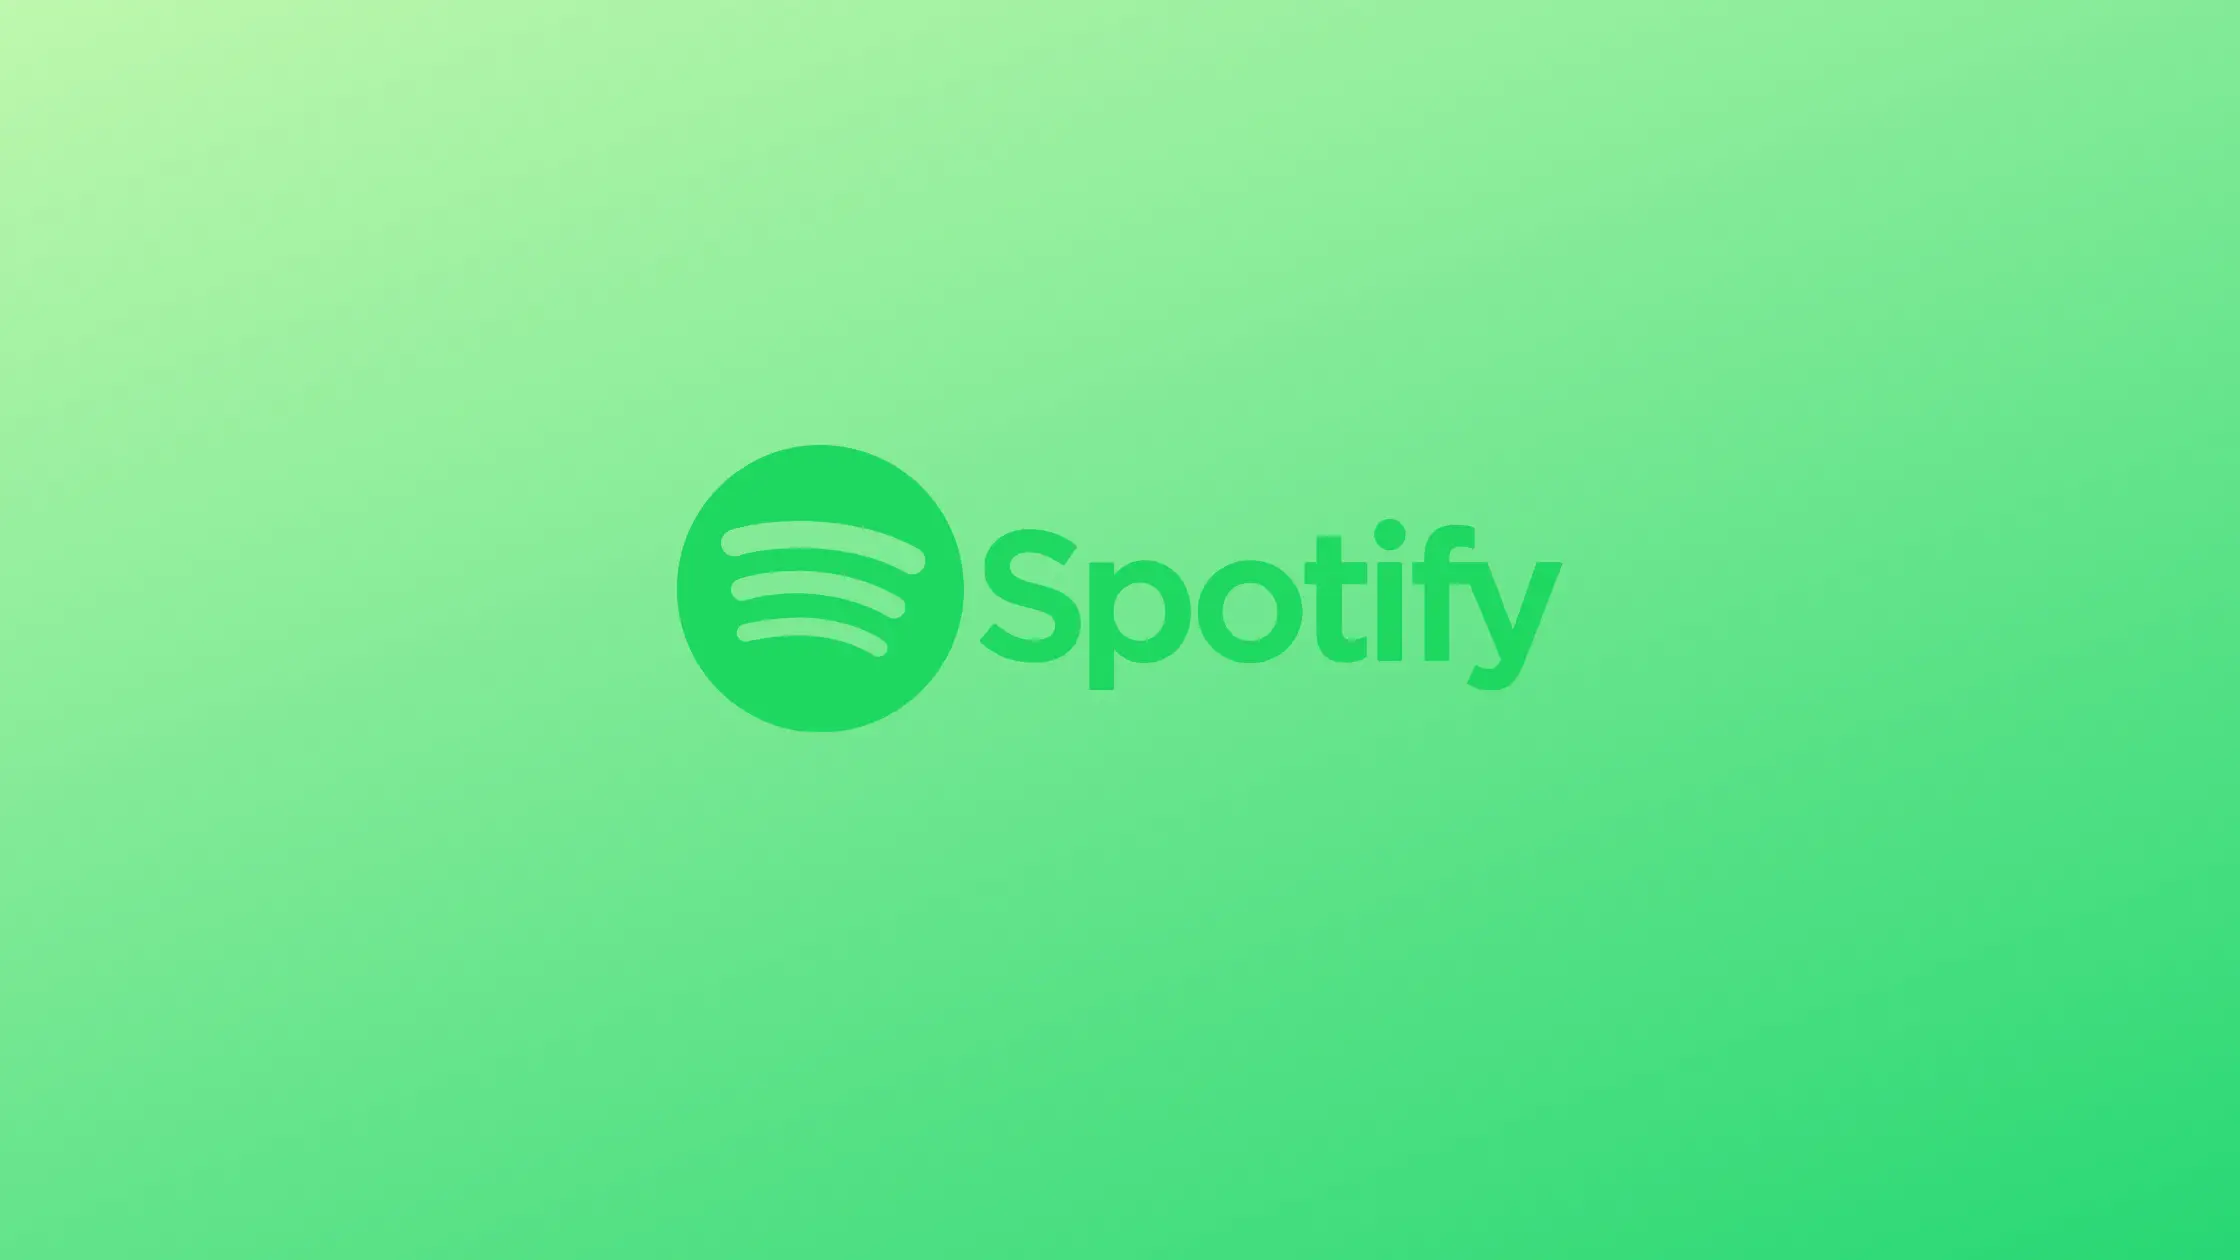 spotify for linux